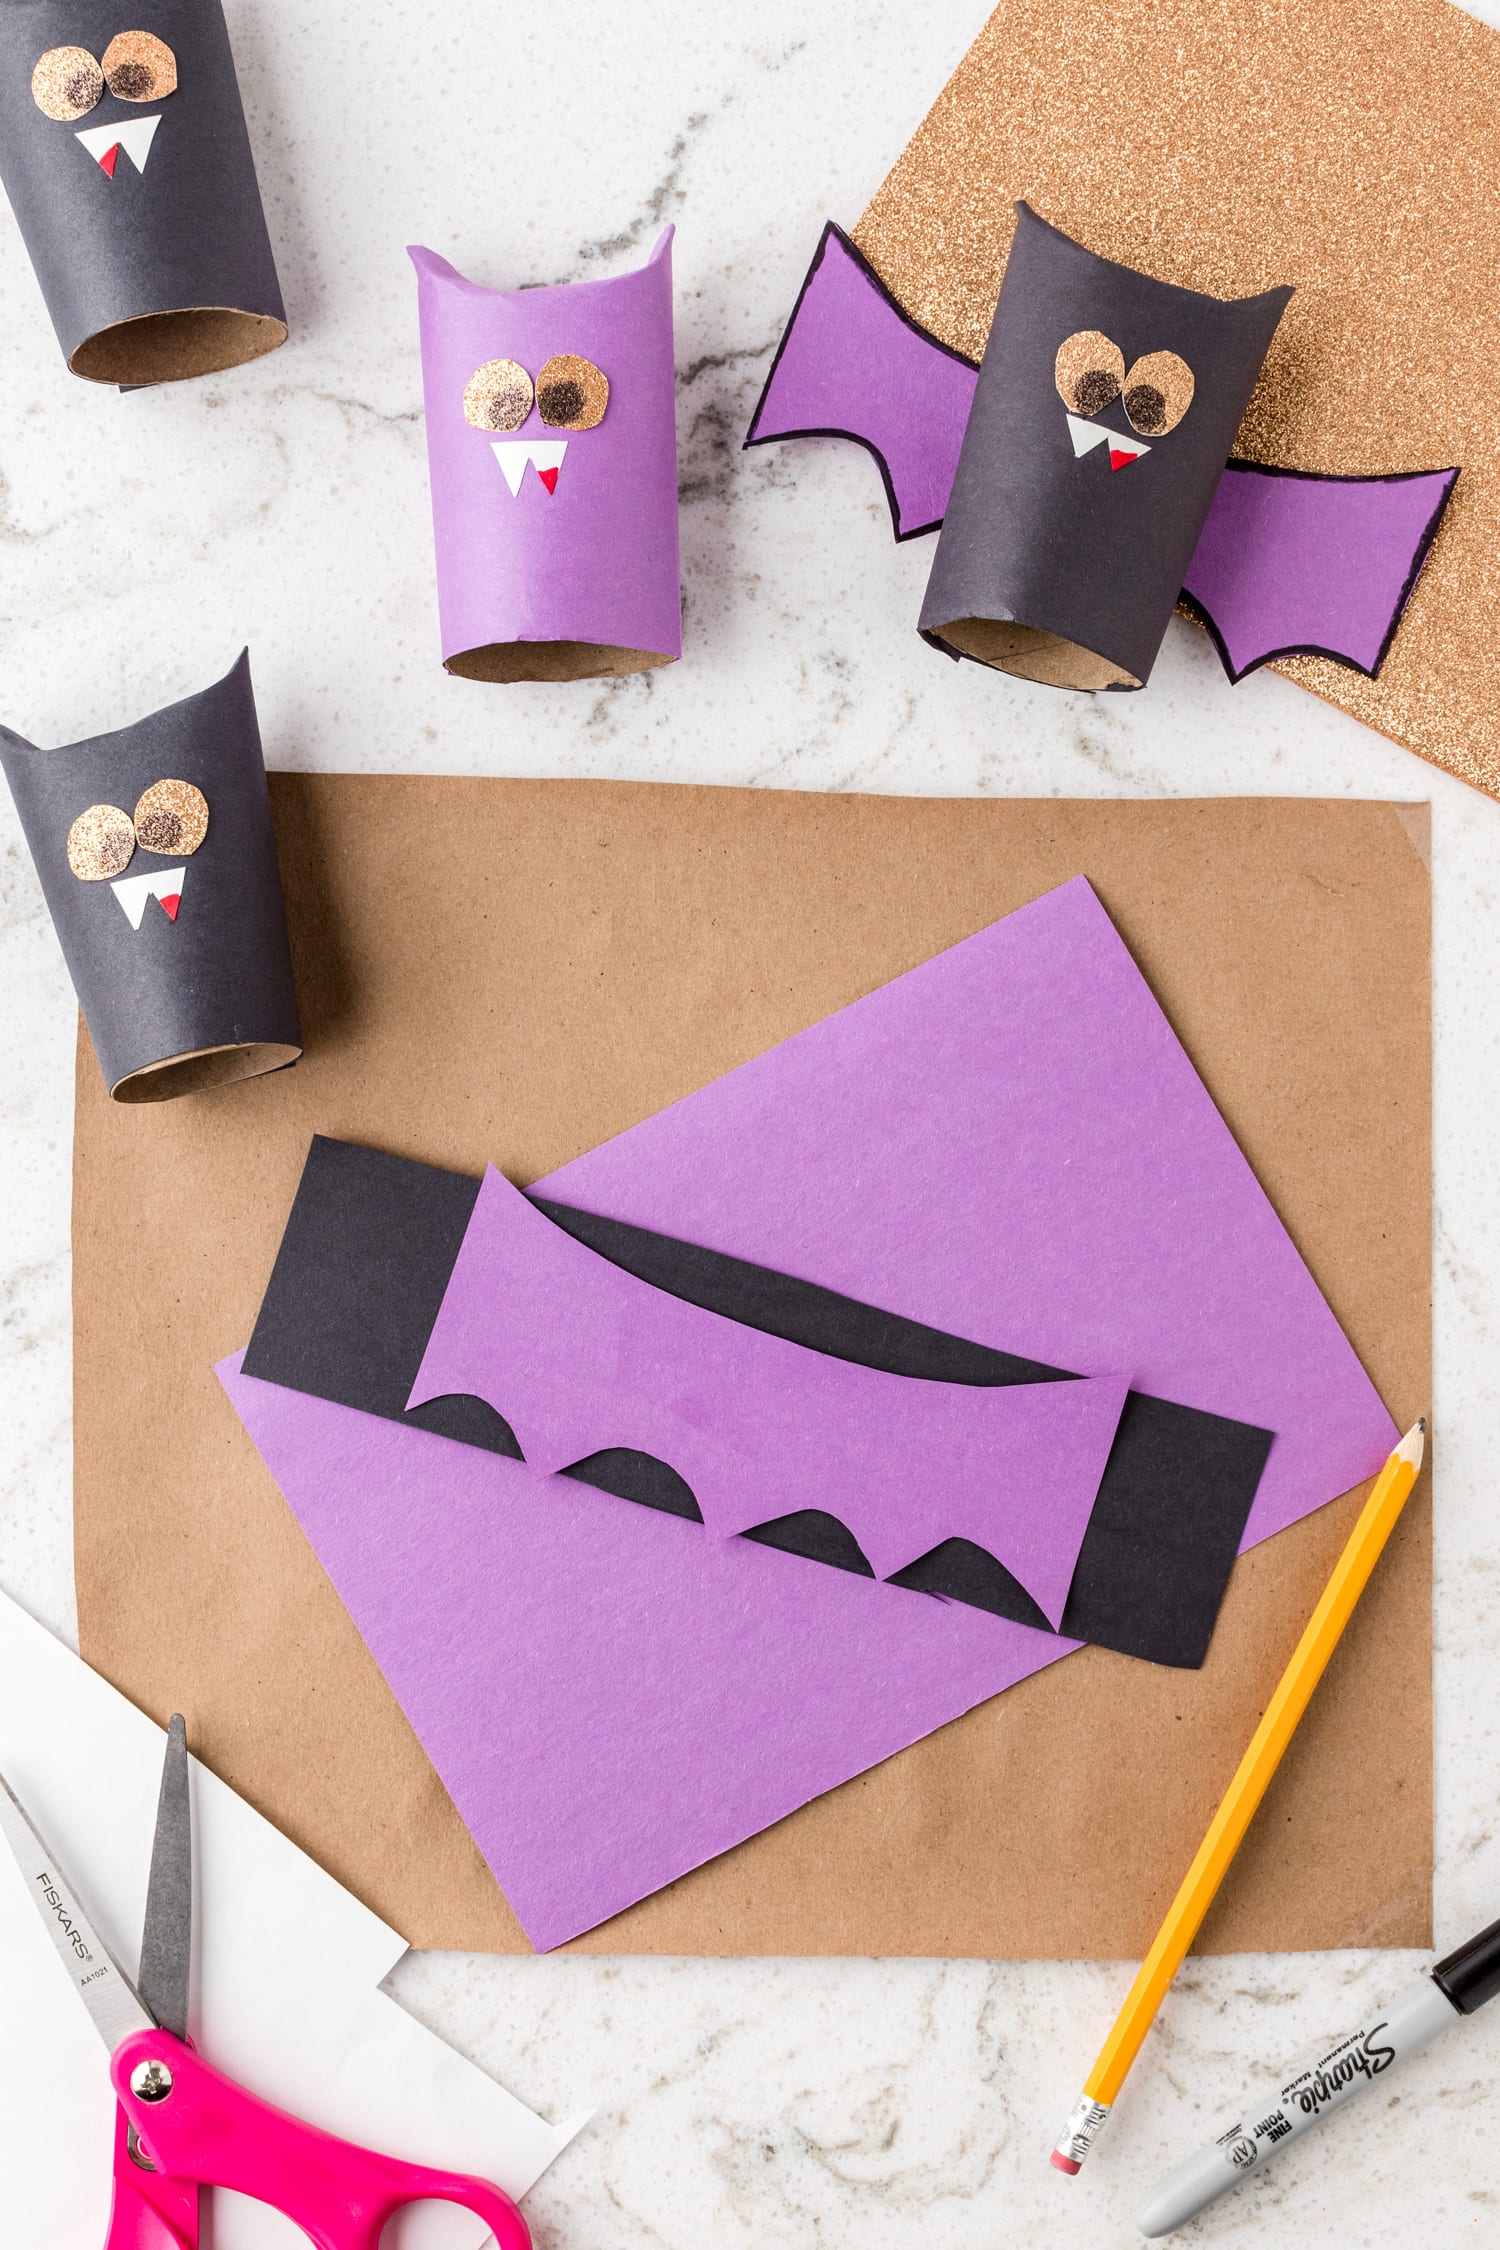 Make bat wings out of construction paper